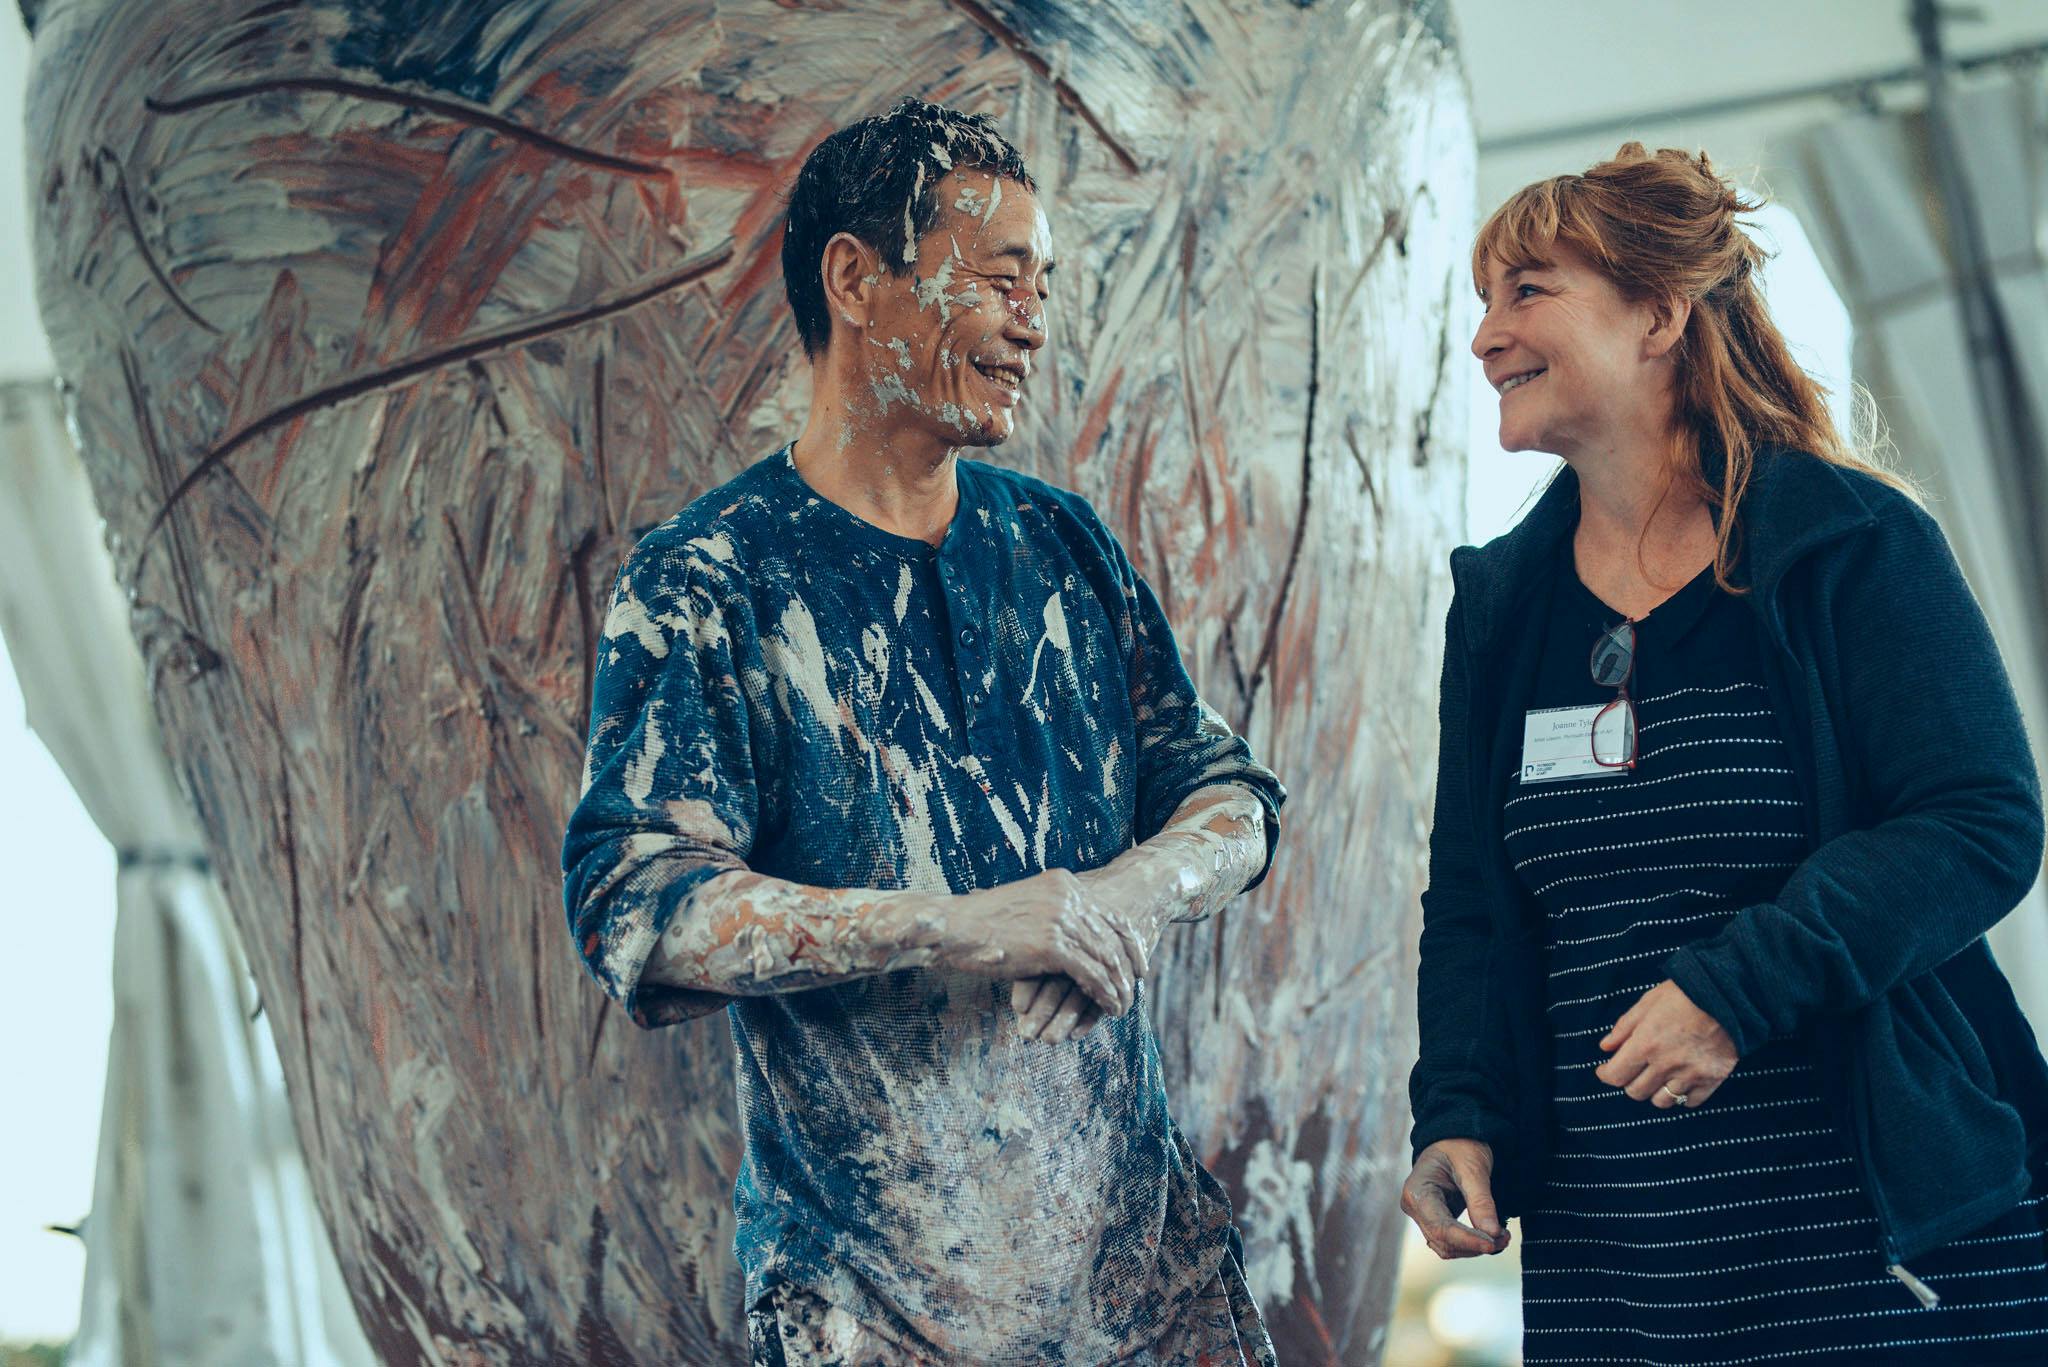 Ceramicist Kang-hyo Lee smiles with Jo Tyler at the culmination of his performance. His clothes and hands are covered in ceramic slip.